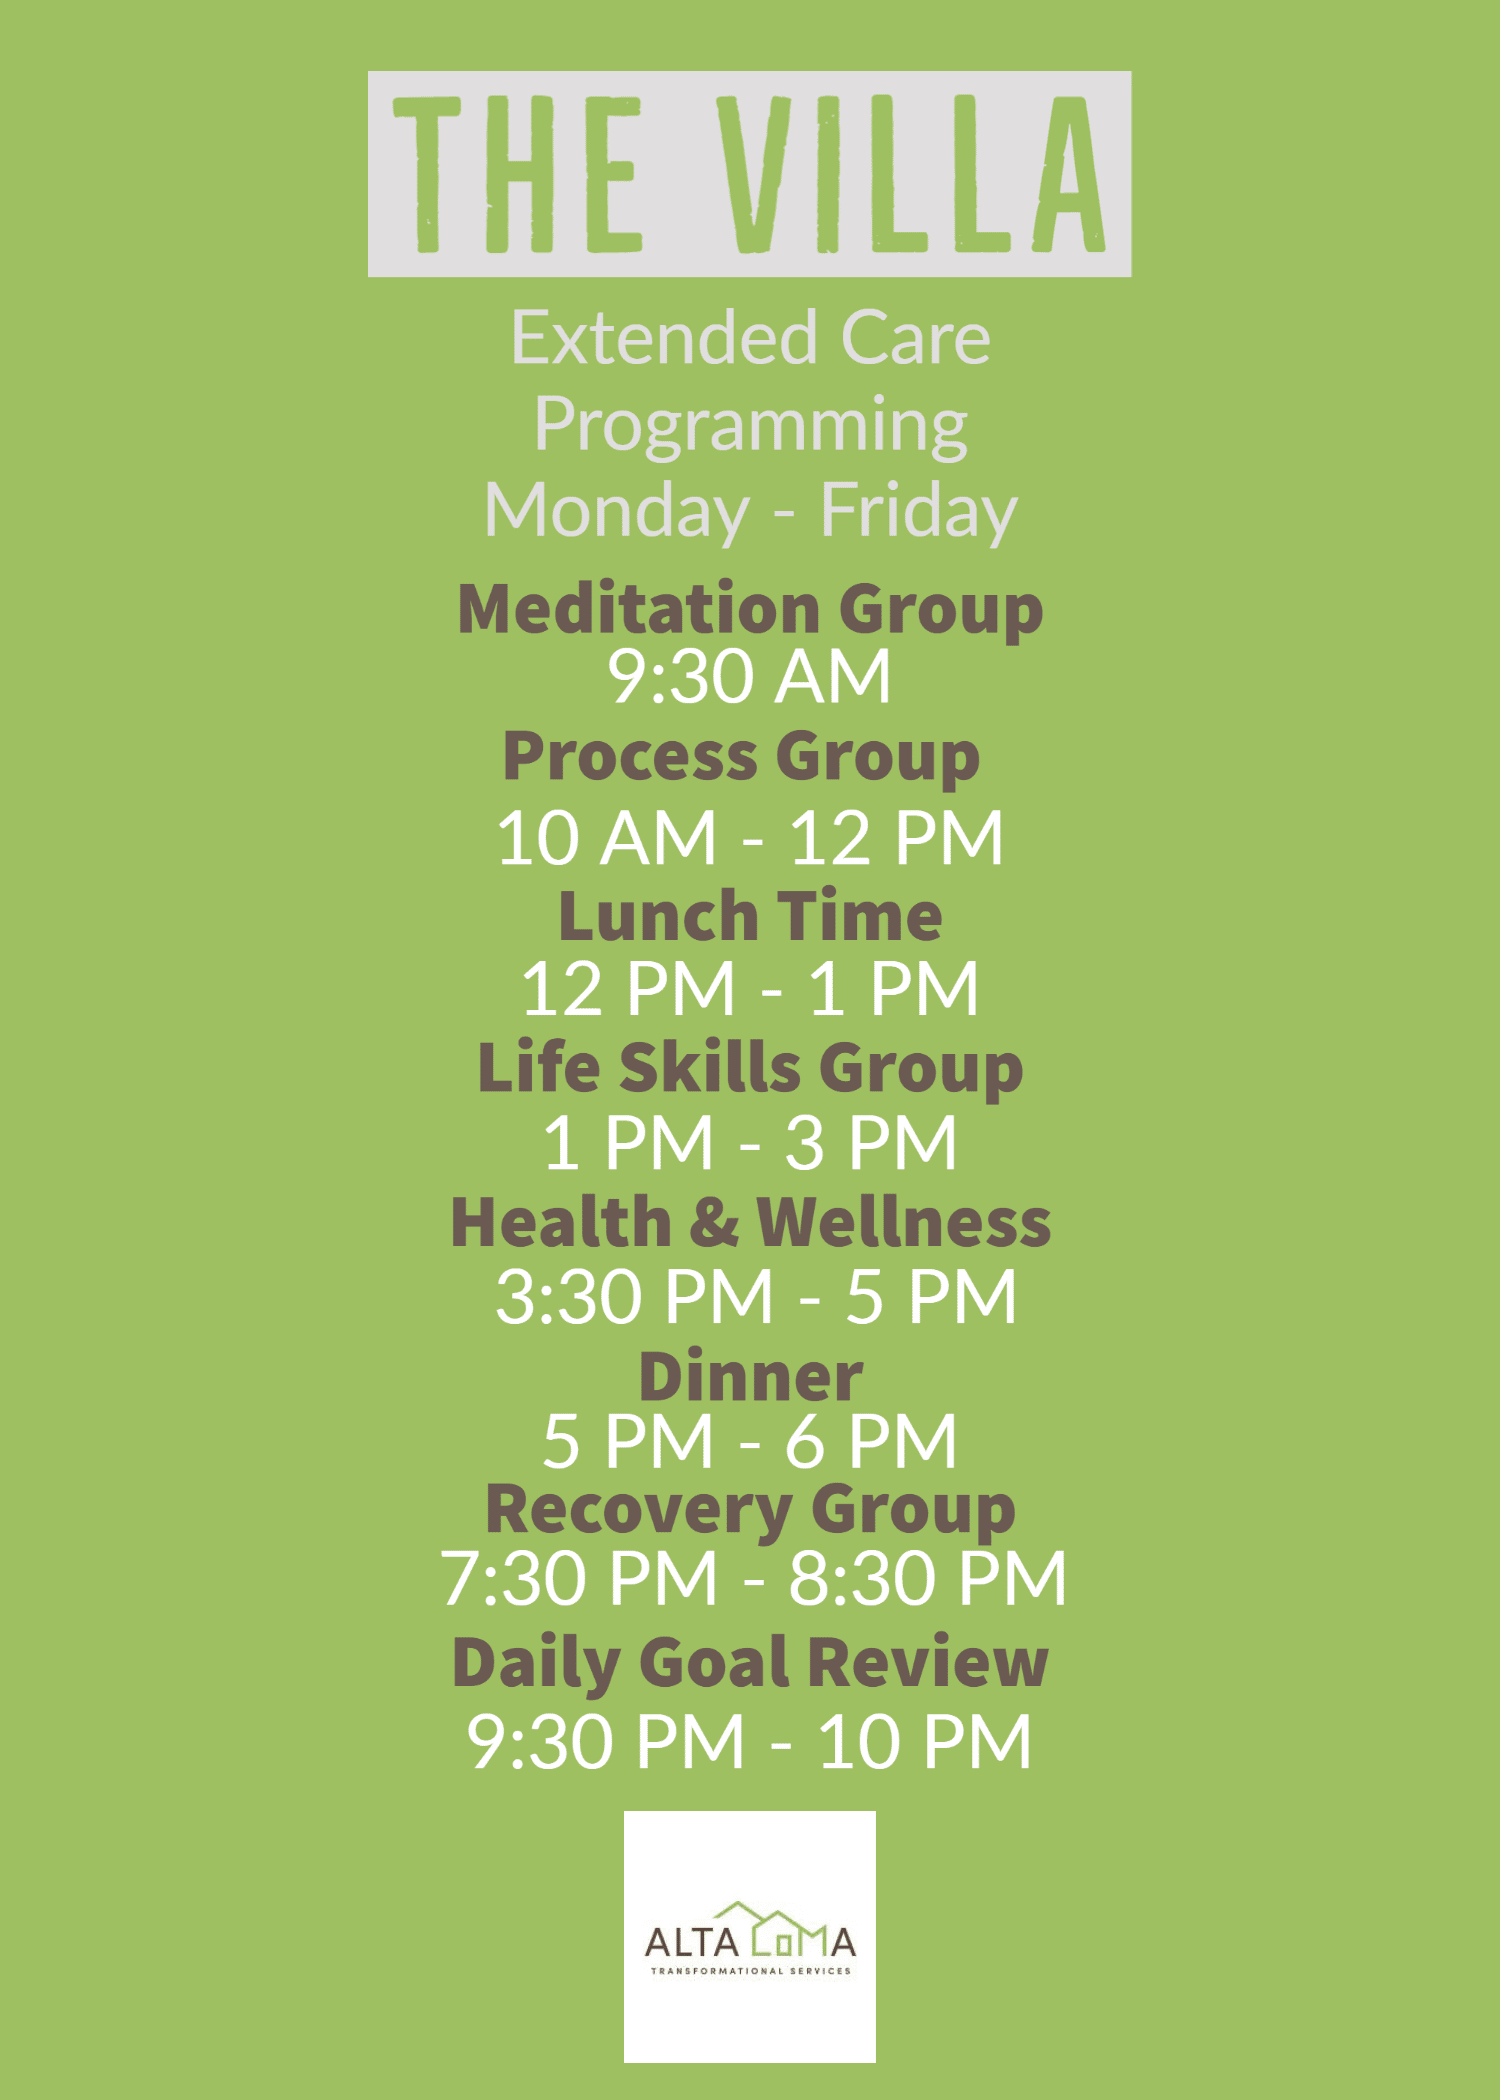 The Villa Extended Care Schedule